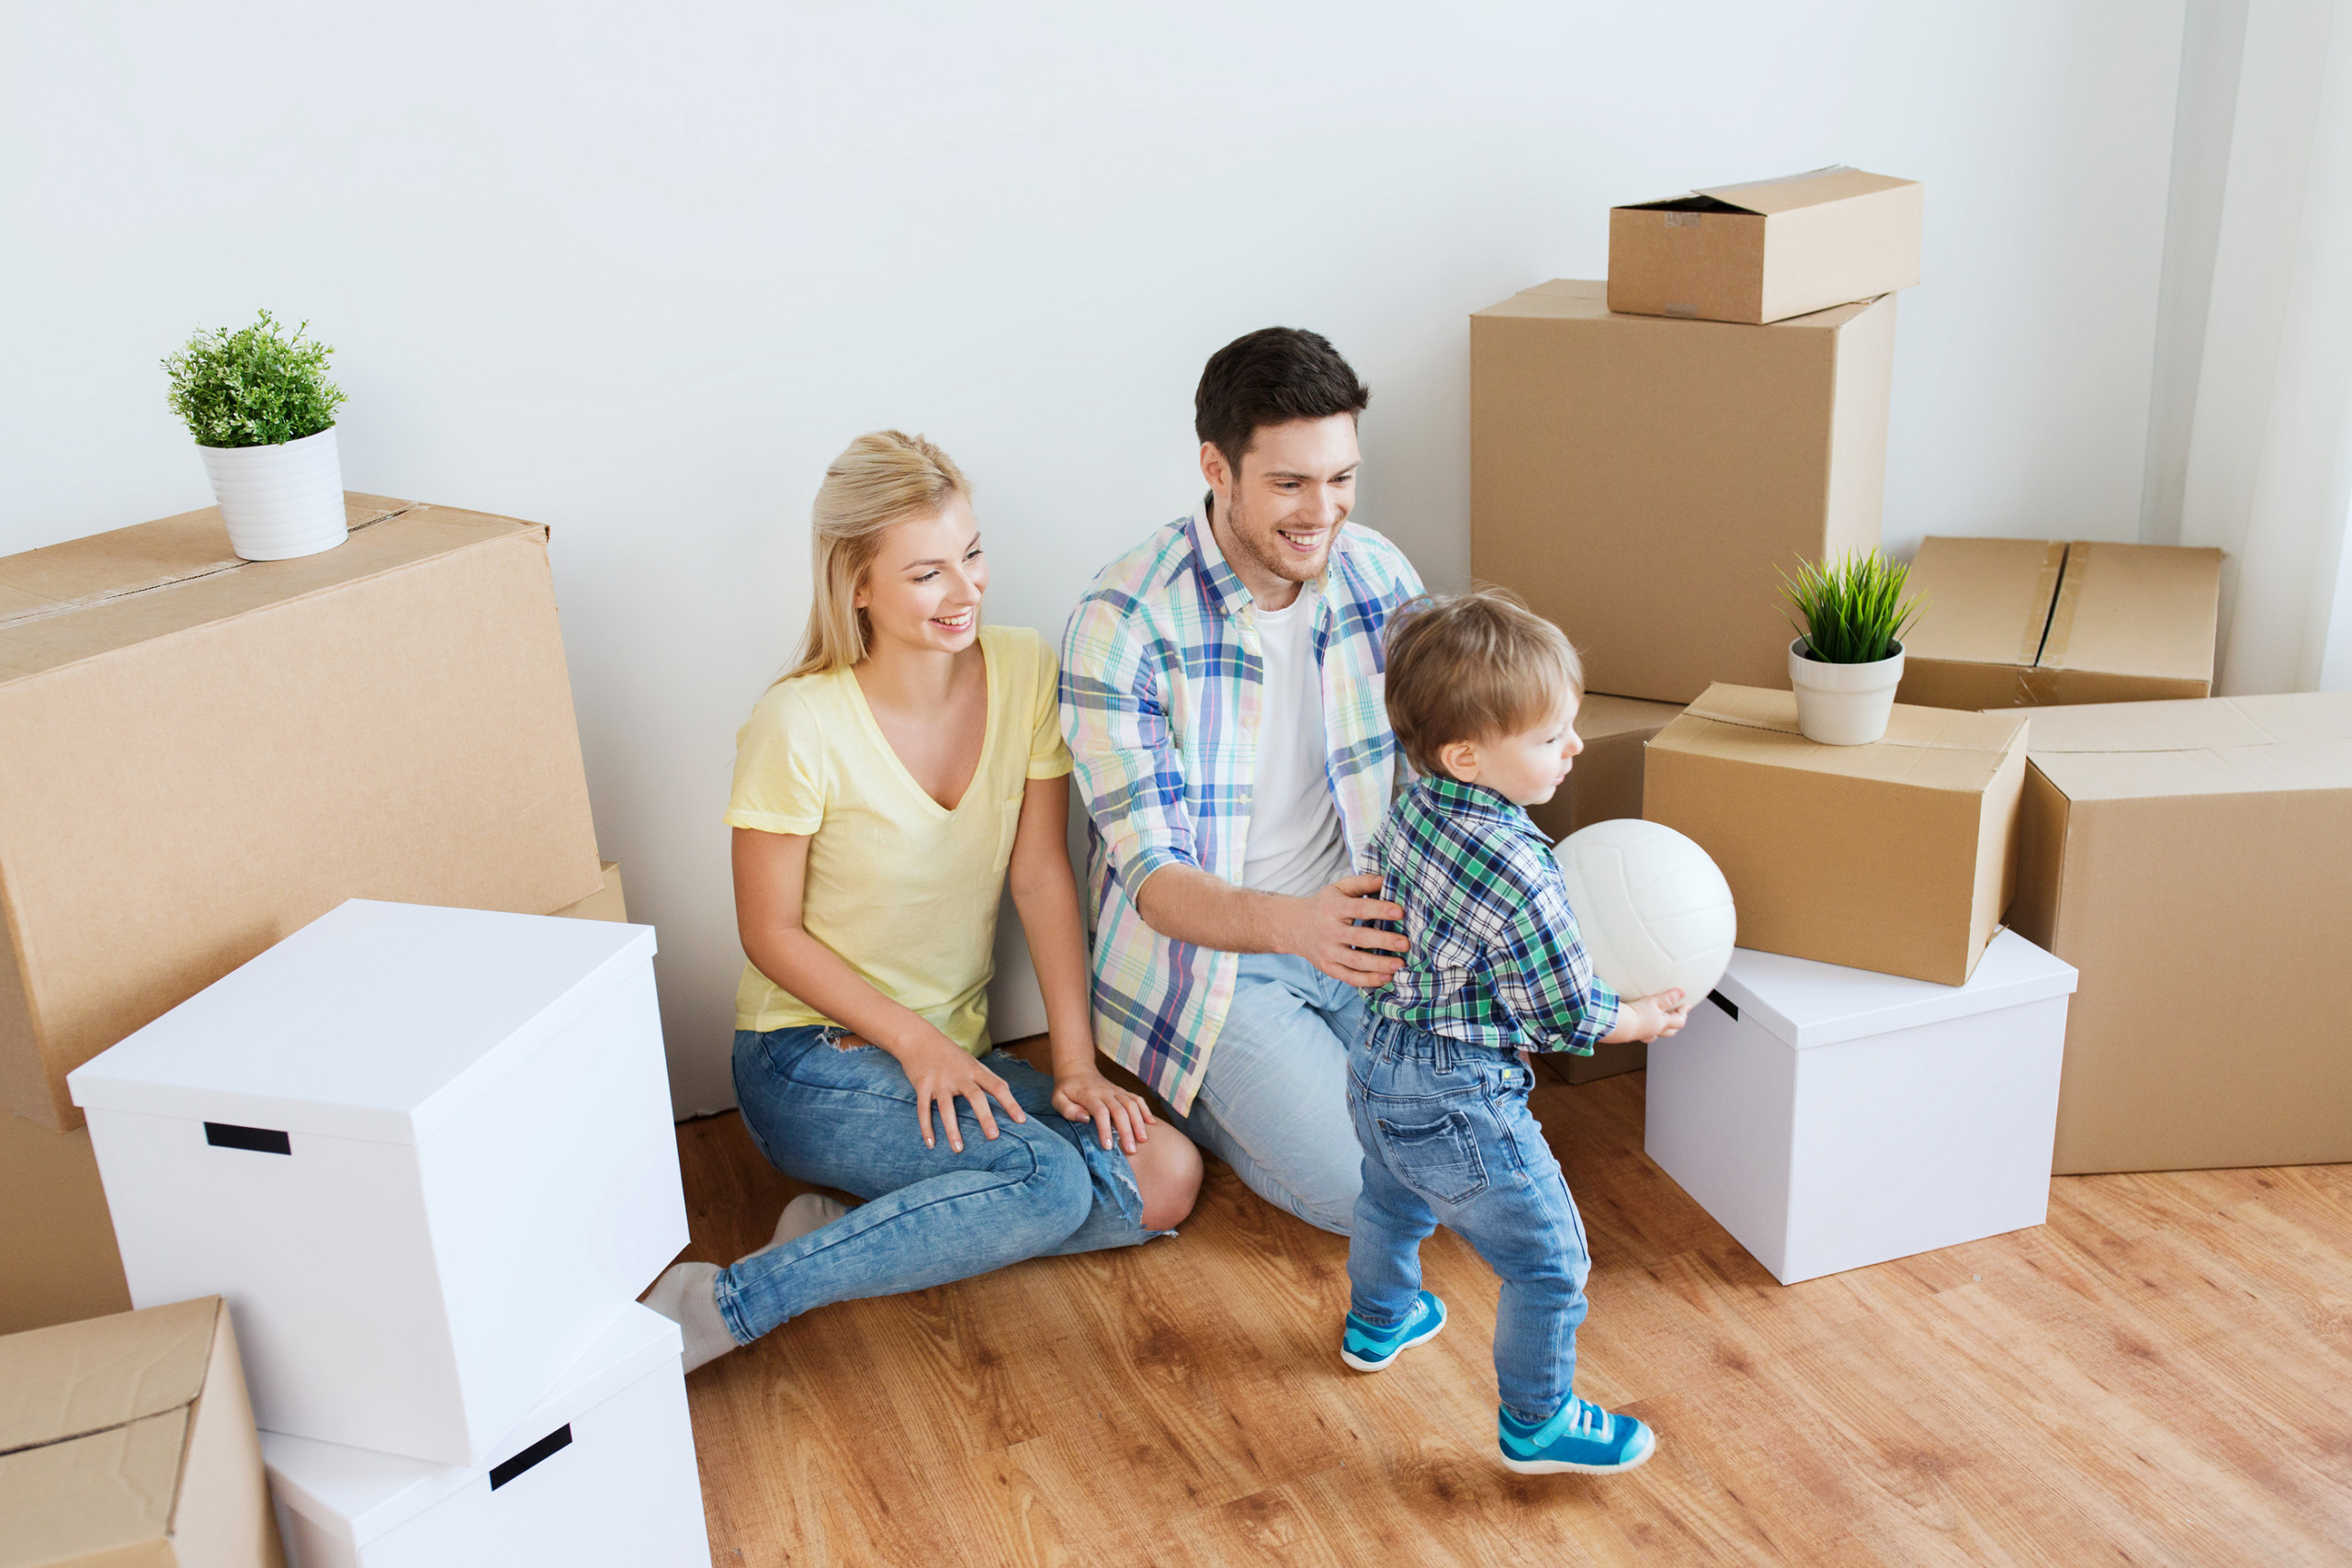 Preparing kids and pets to move house